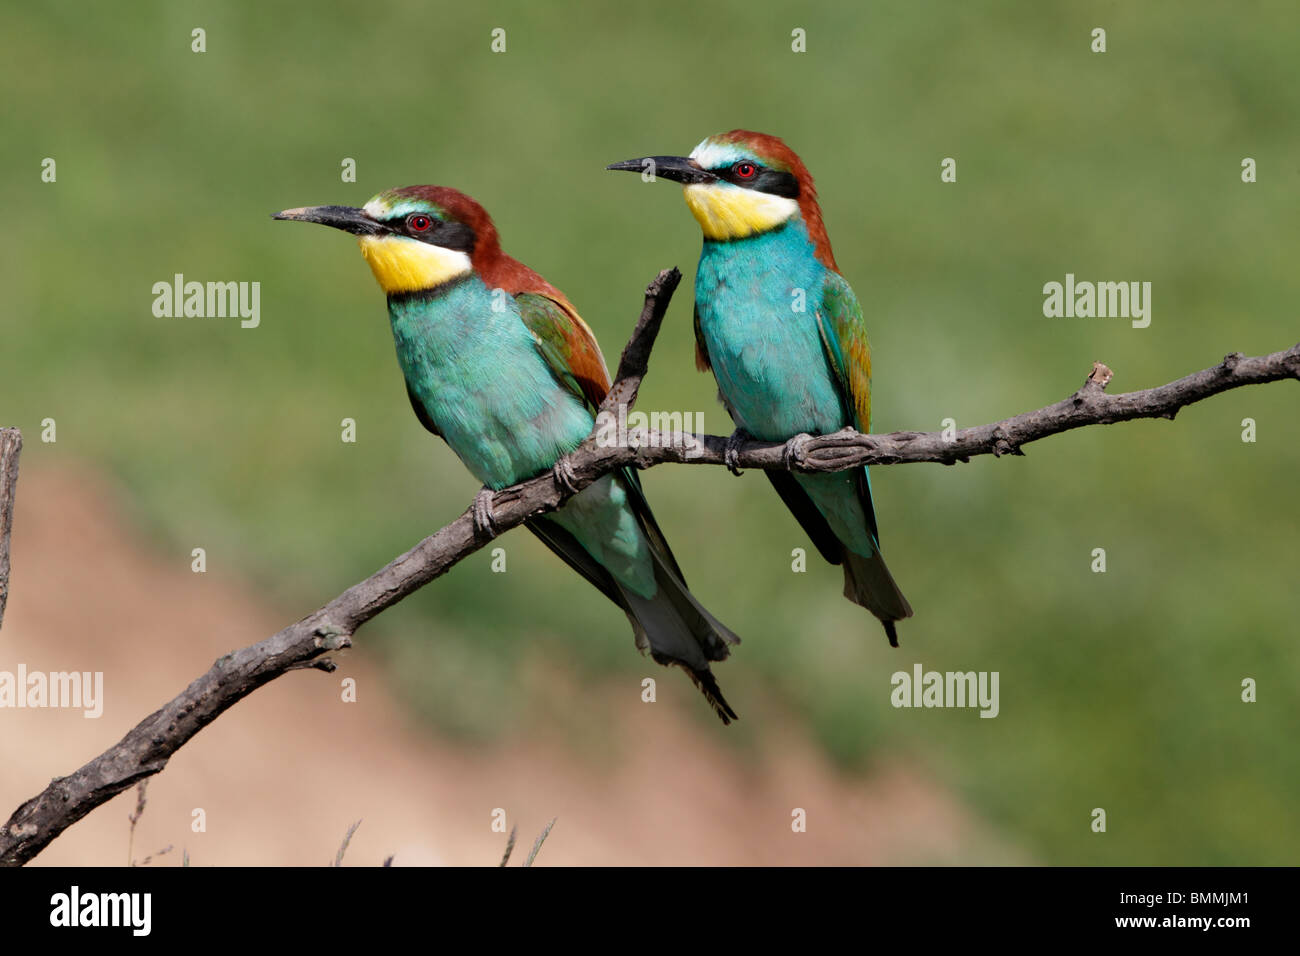 European bee-eater, Merops apiaster, two birds perched on branch, Bulgaria, May 2010 Stock Photo